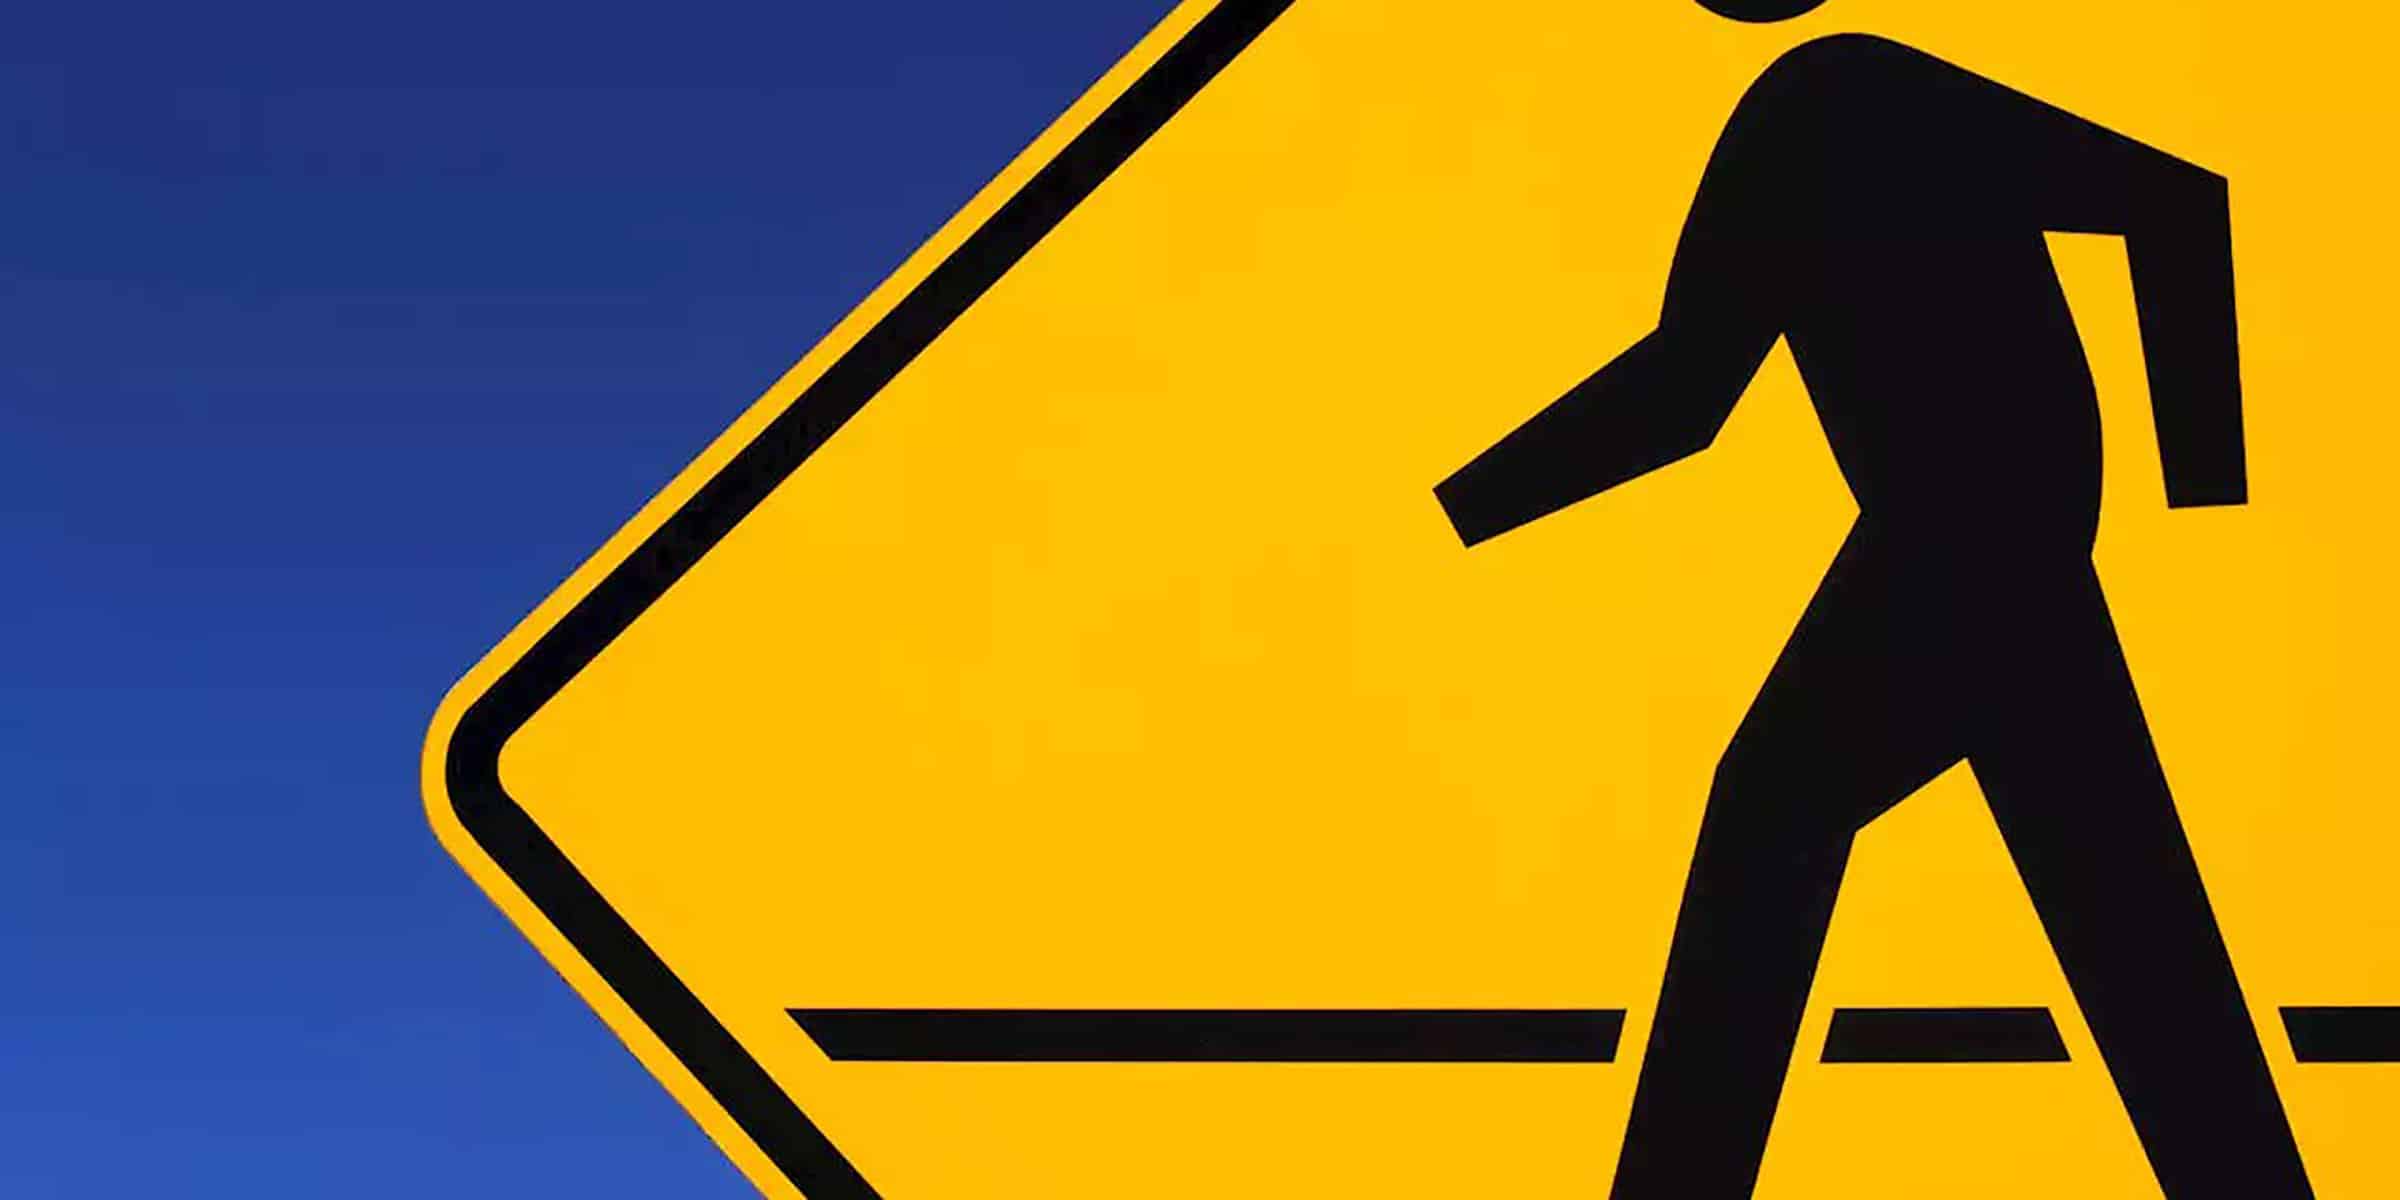 Crime No More: Jaywalking To Be Allowed In California ‘As Long As It Is Safe To Do So’